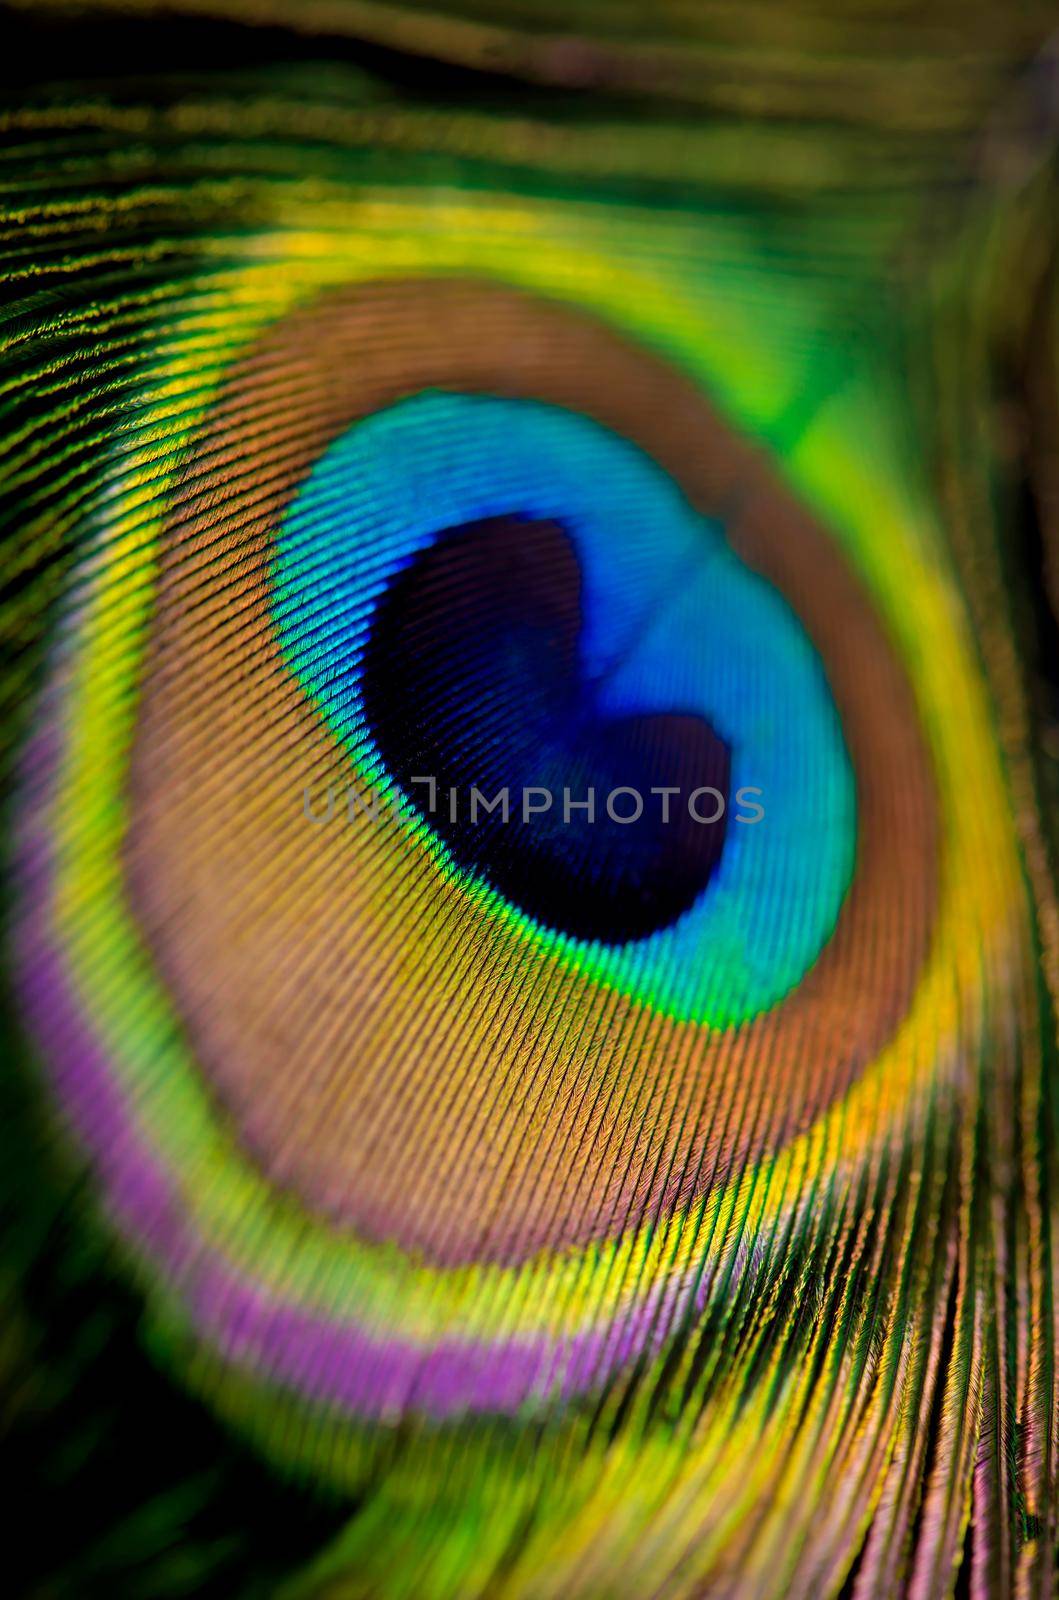 Close up of a Peacock feather filling the frame